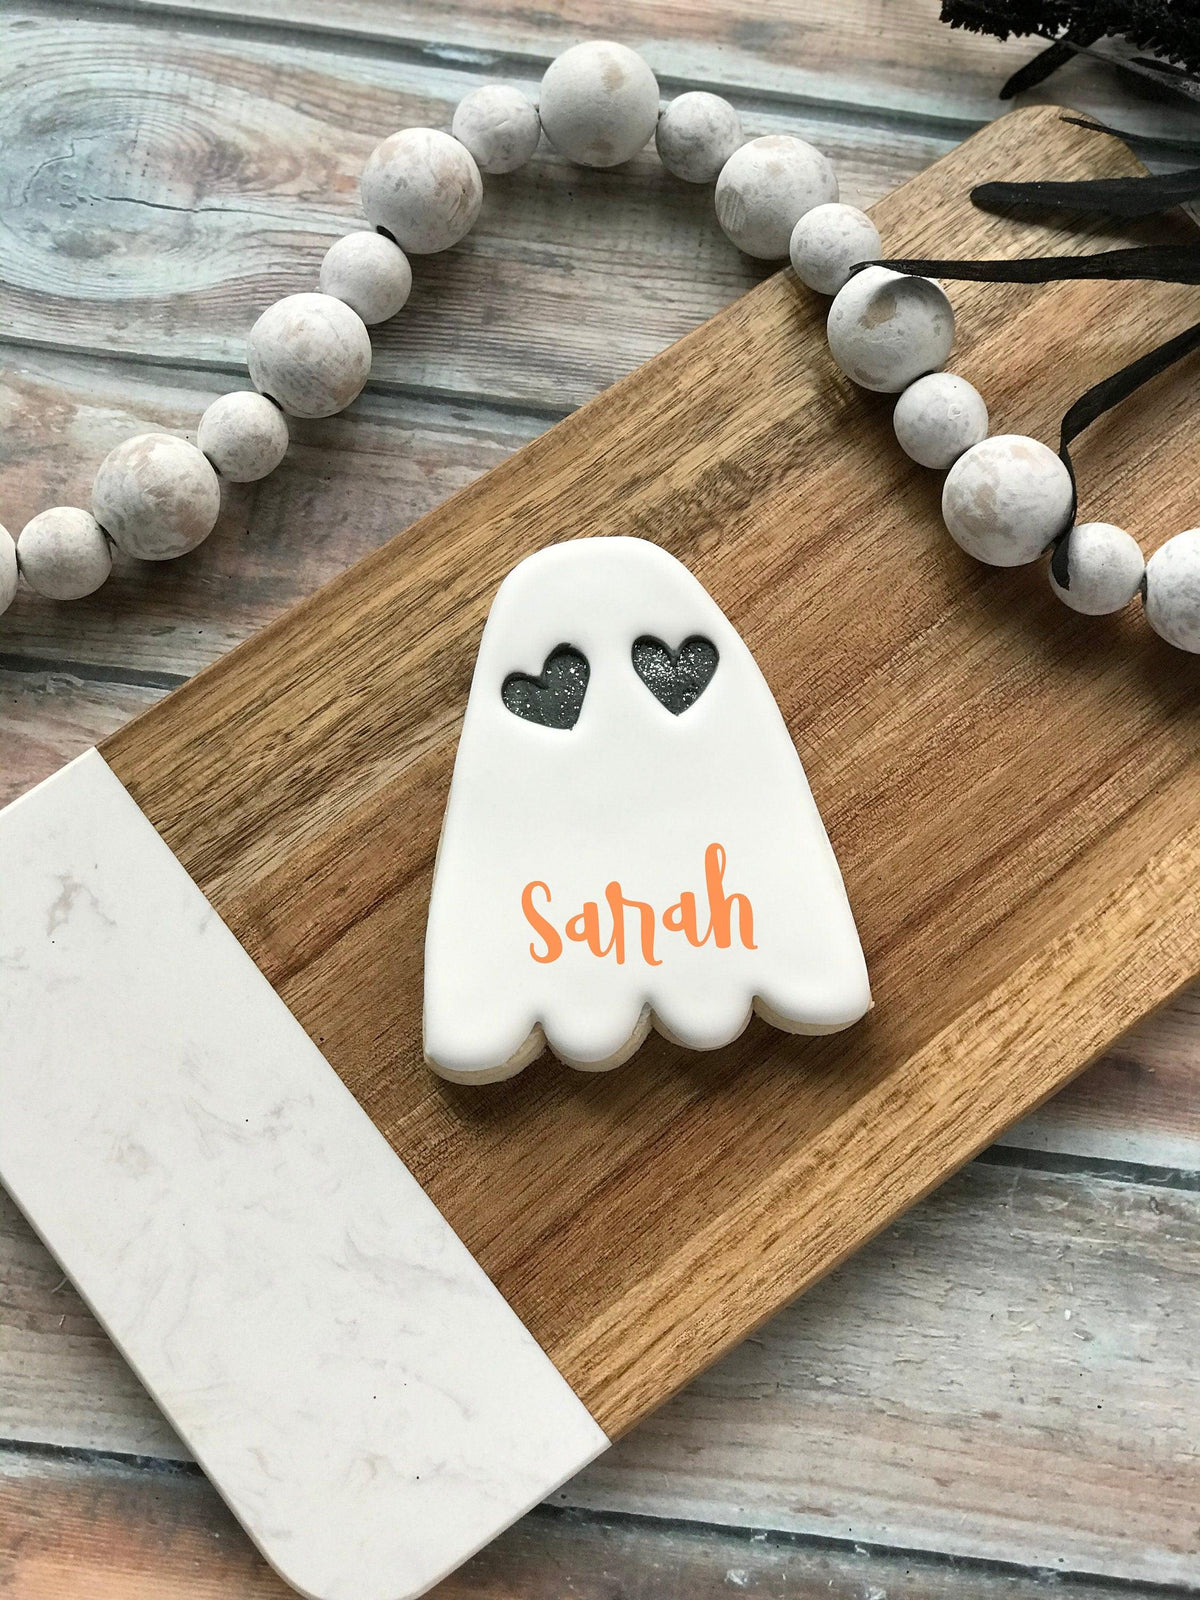 Scallop Ghost Cookie Cutter - Sweetleigh 